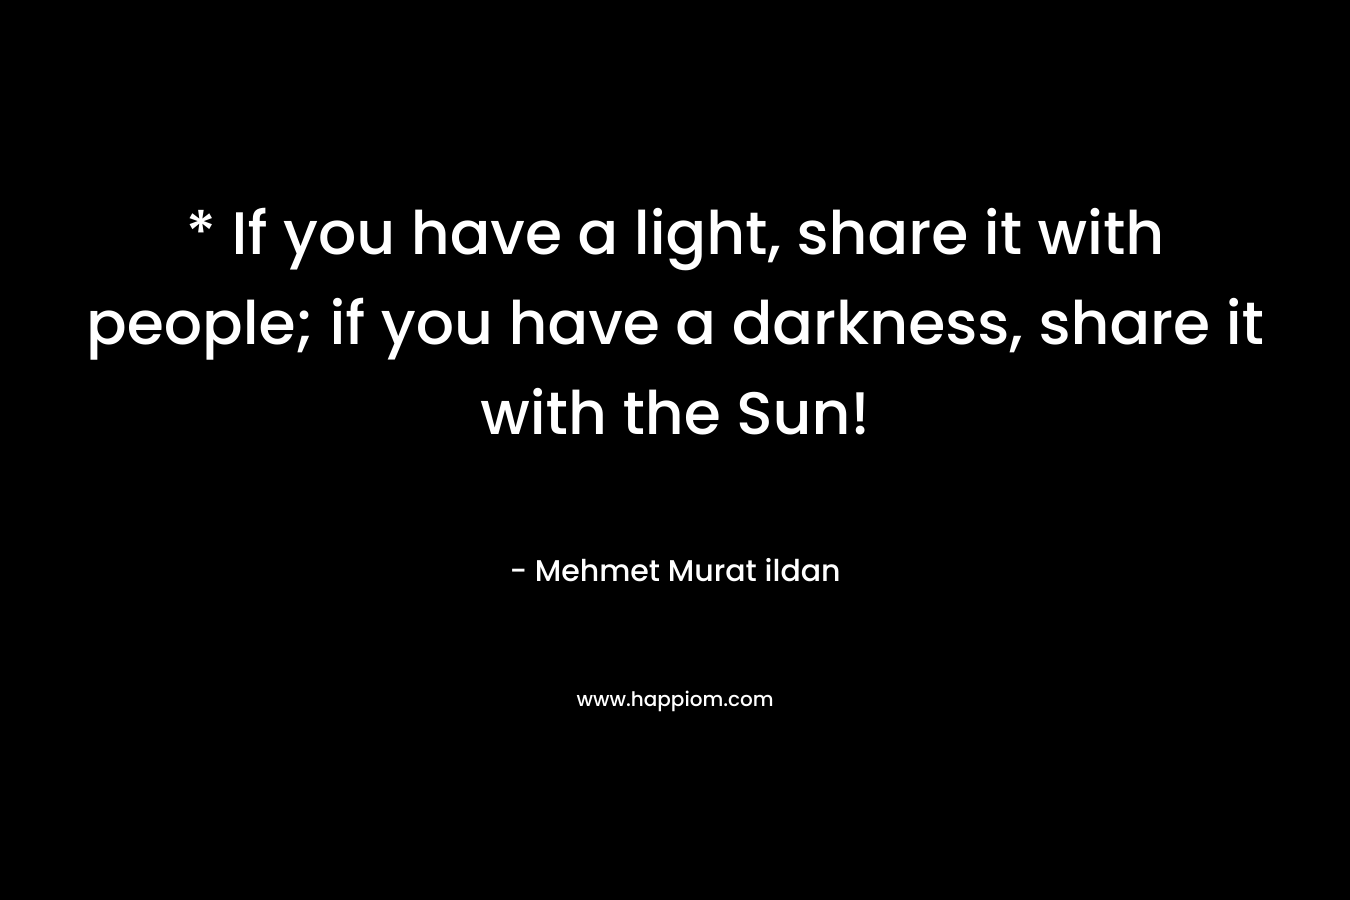 * If you have a light, share it with people; if you have a darkness, share it with the Sun!